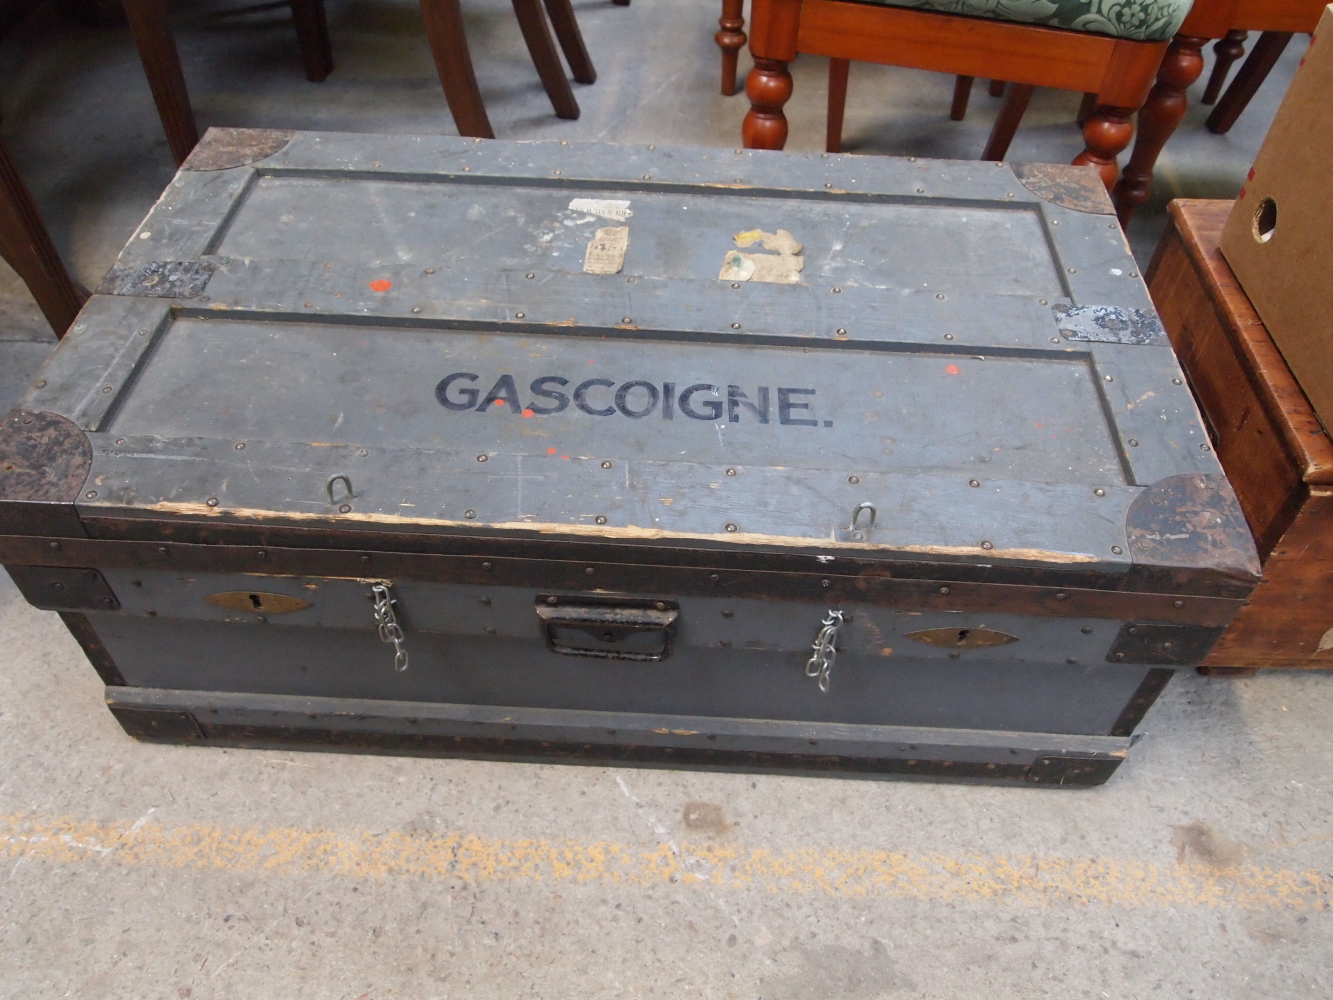 Sale Item:    LARGE TRUNK   Vat Status:   No Vat   Buyers Premium:  This lot is subject to a Buyers